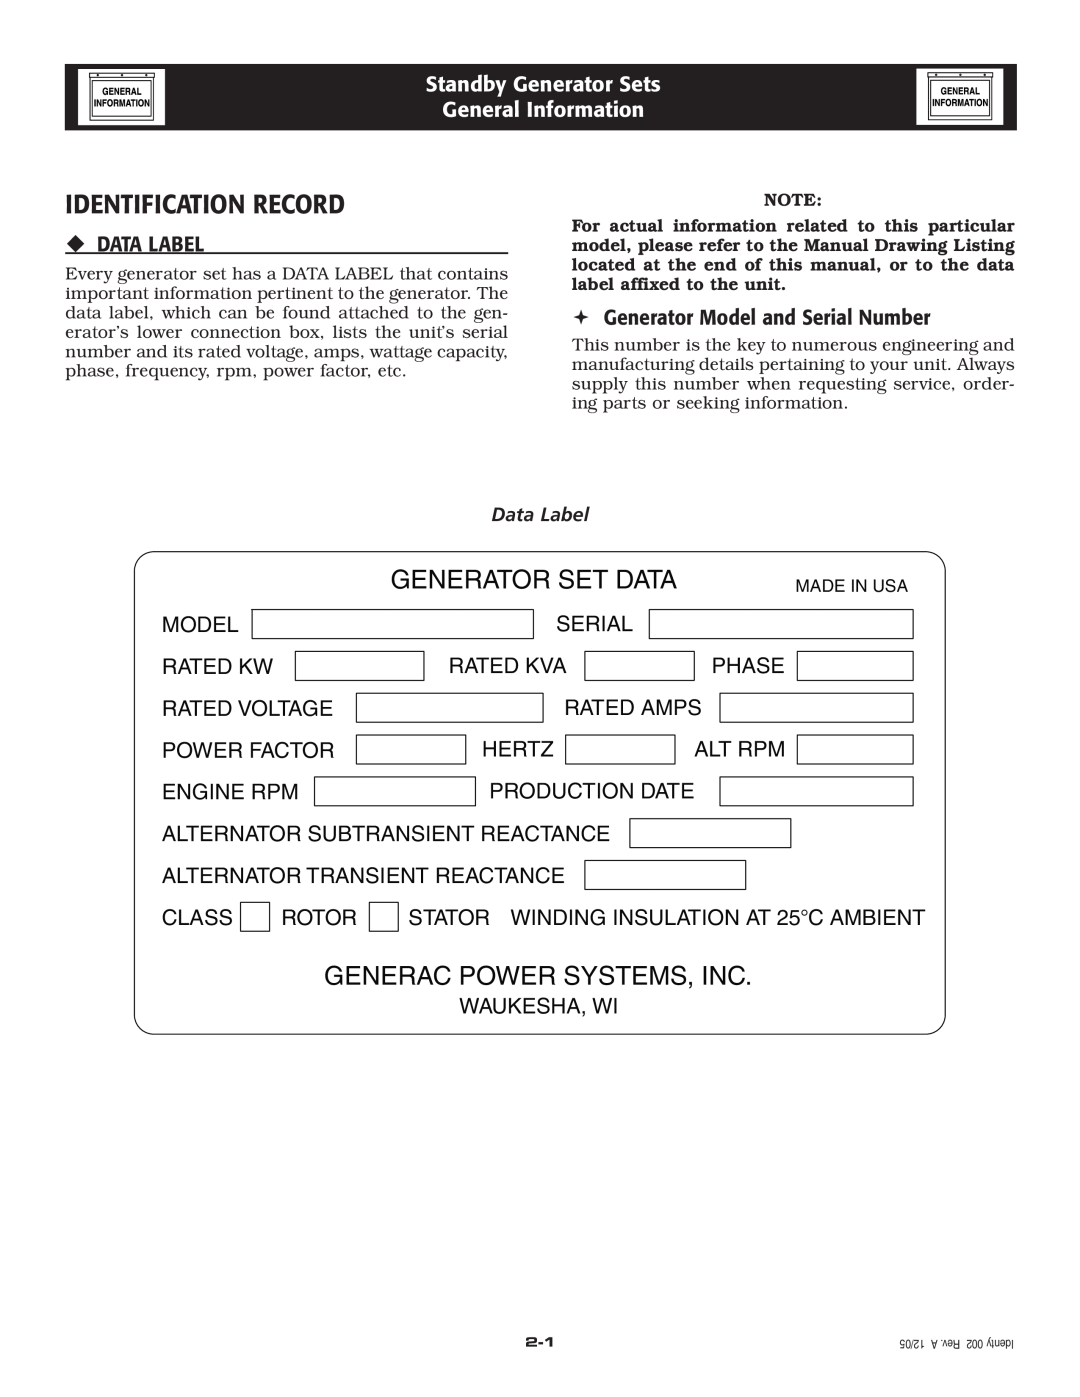 Generac Power Systems 005261-1, 005262-1 Identification Record, Standby Generator Sets General Information, ‹ Data Label 